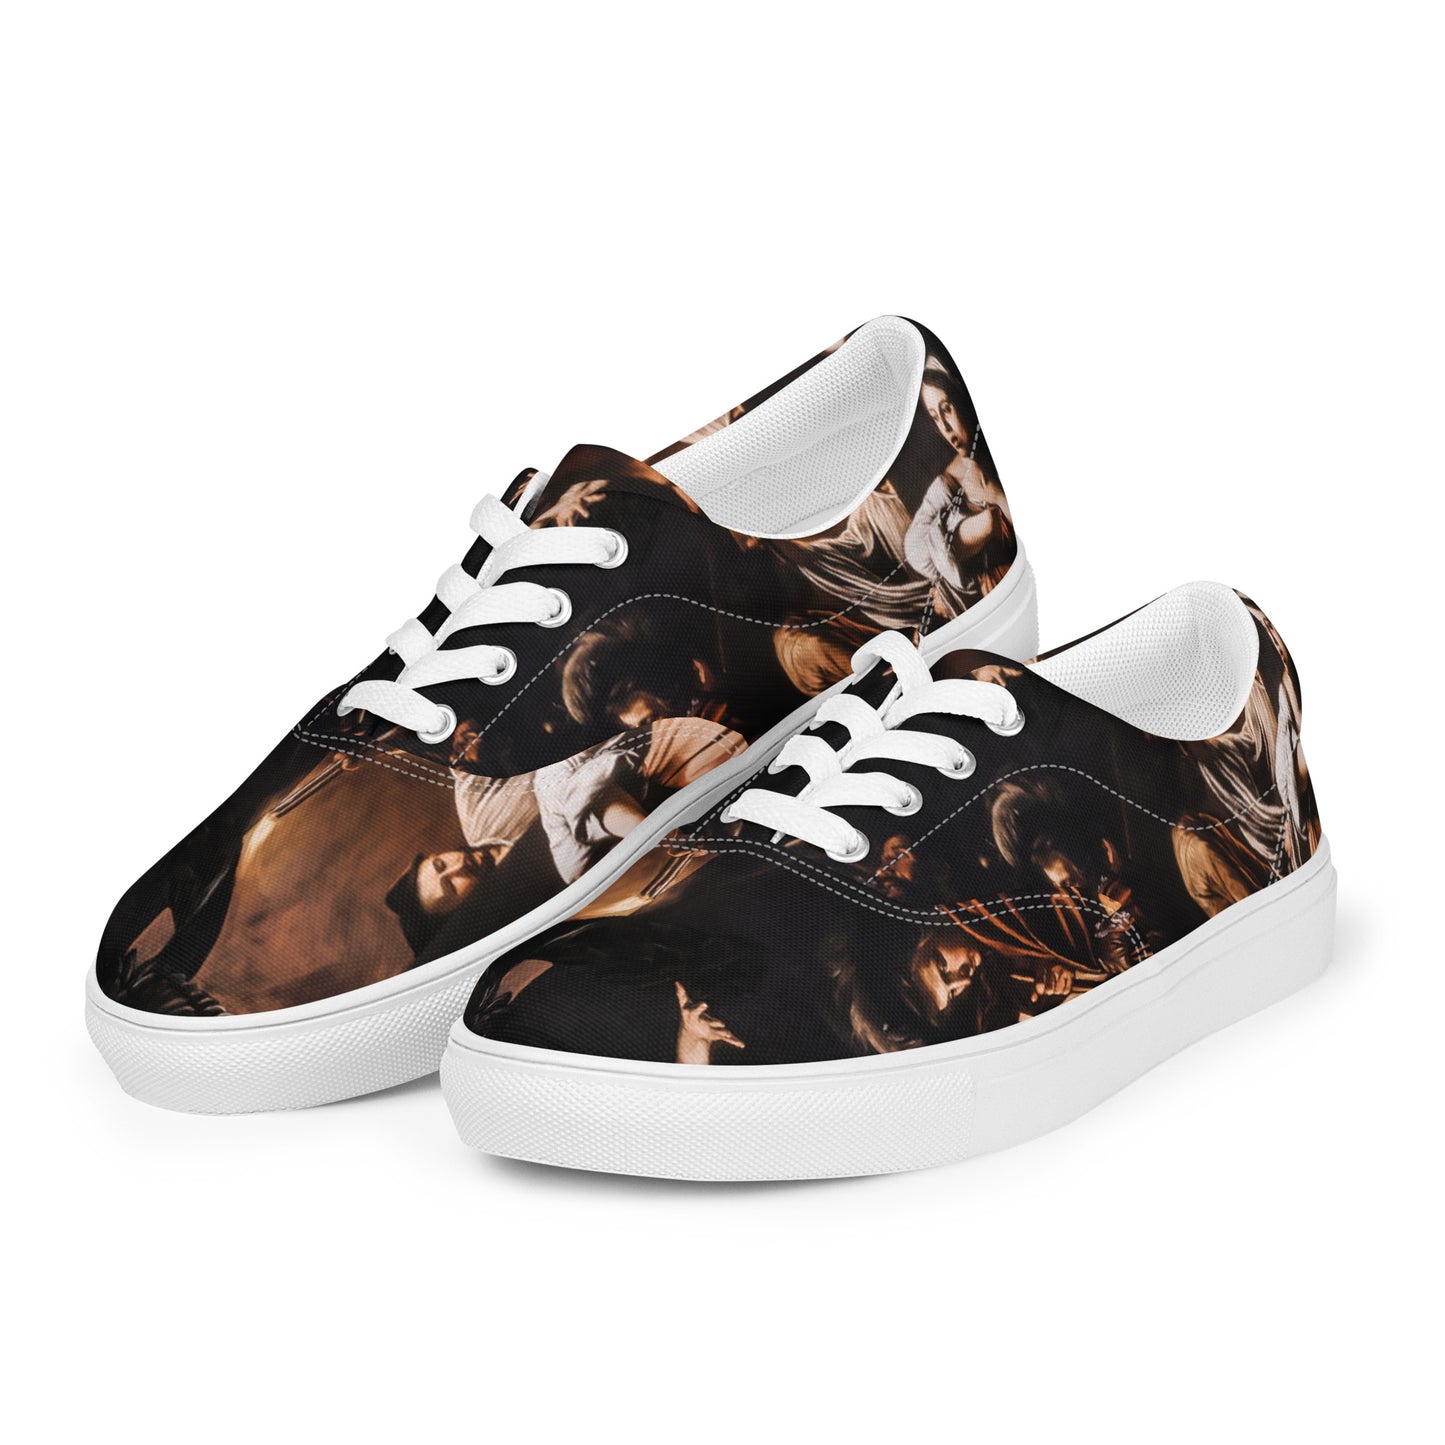 The Seven Works of Mercy Caravaggio Sneakers